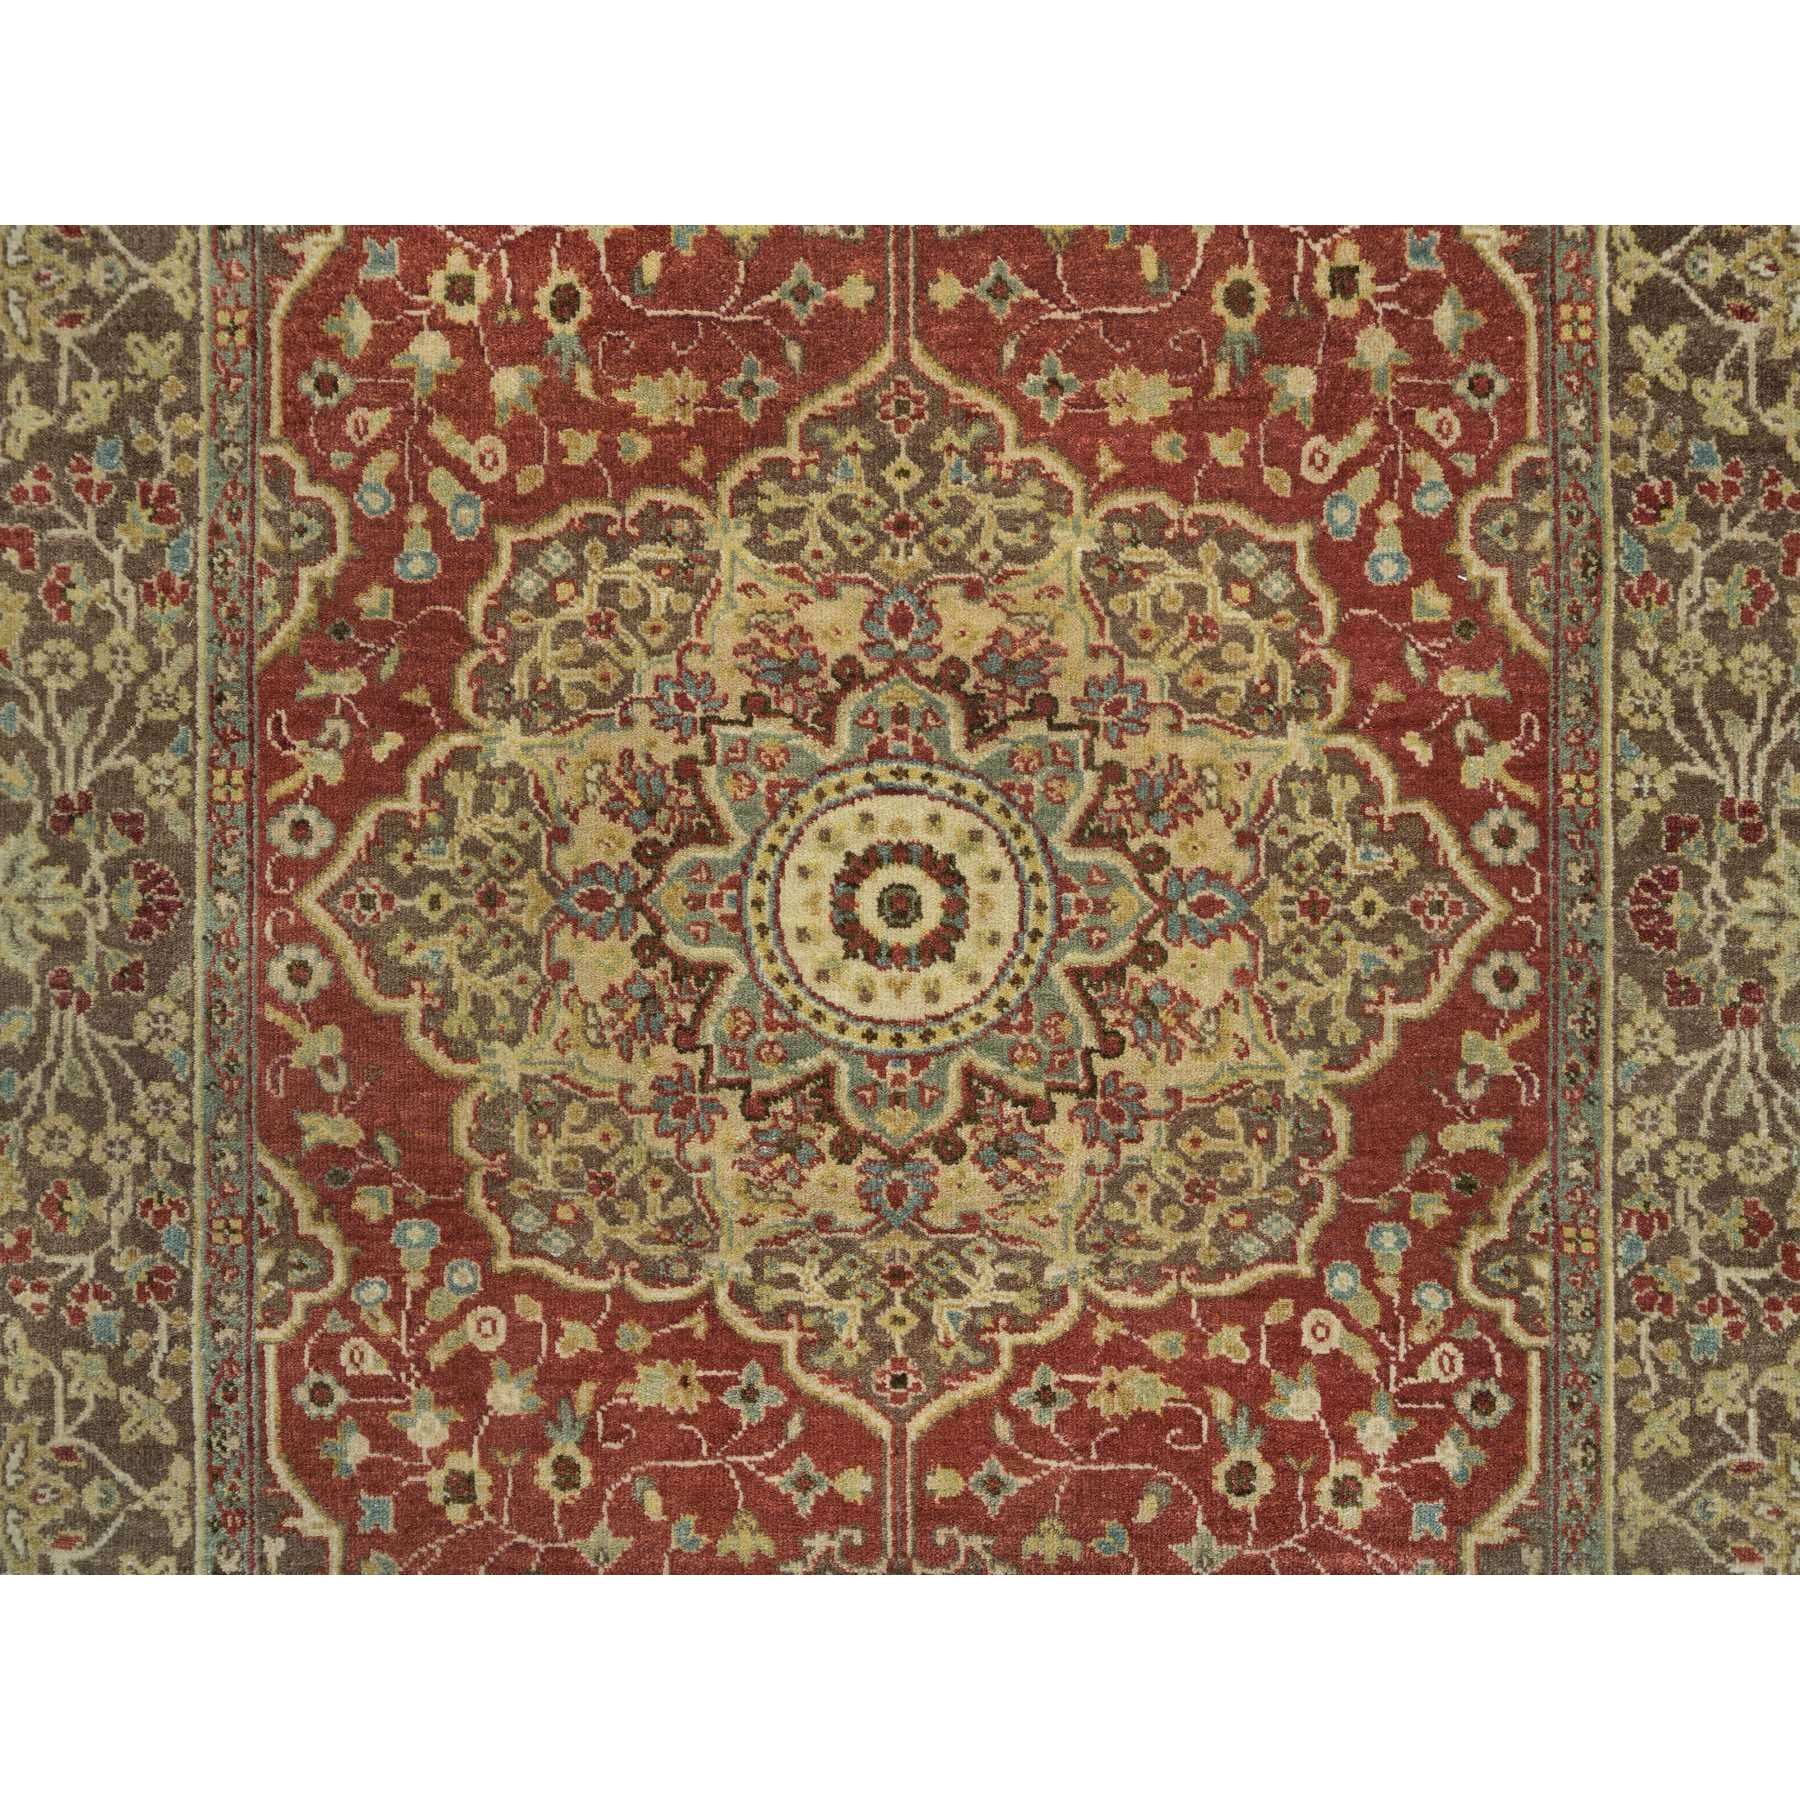  Wool Hand-Knotted Area Rug 4'2